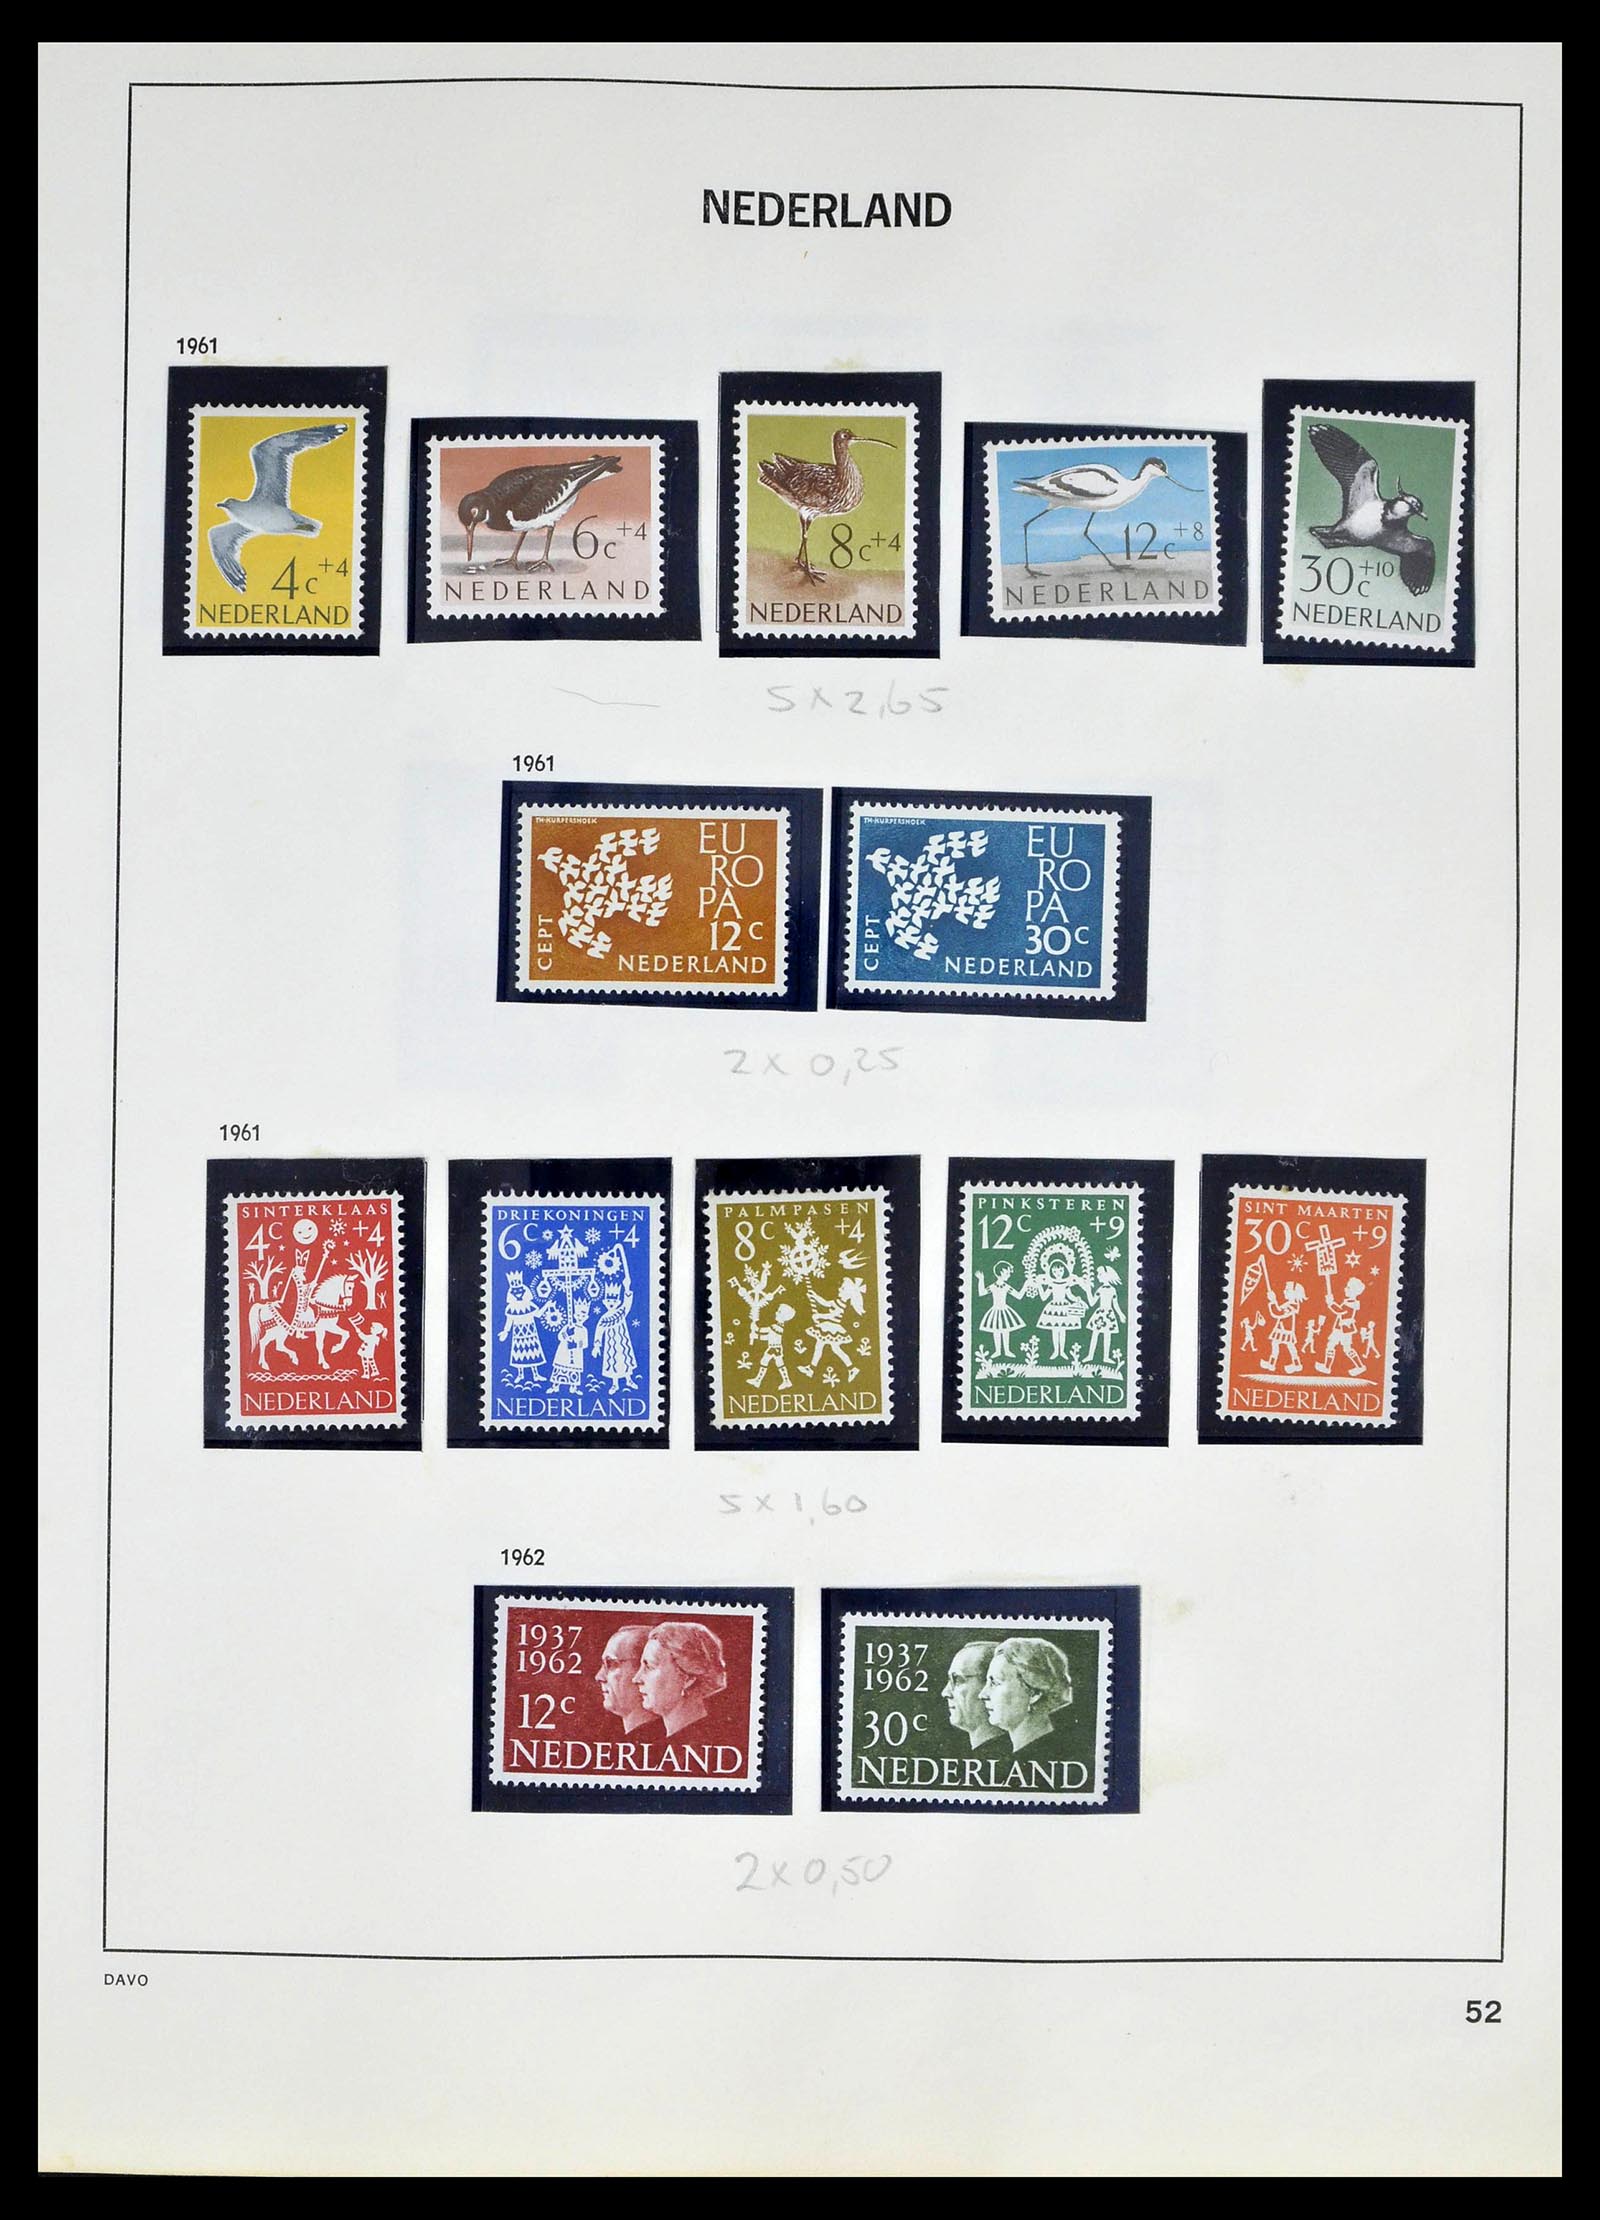 39318 0050 - Stamp collection 39318 Netherlands 1872-1977.